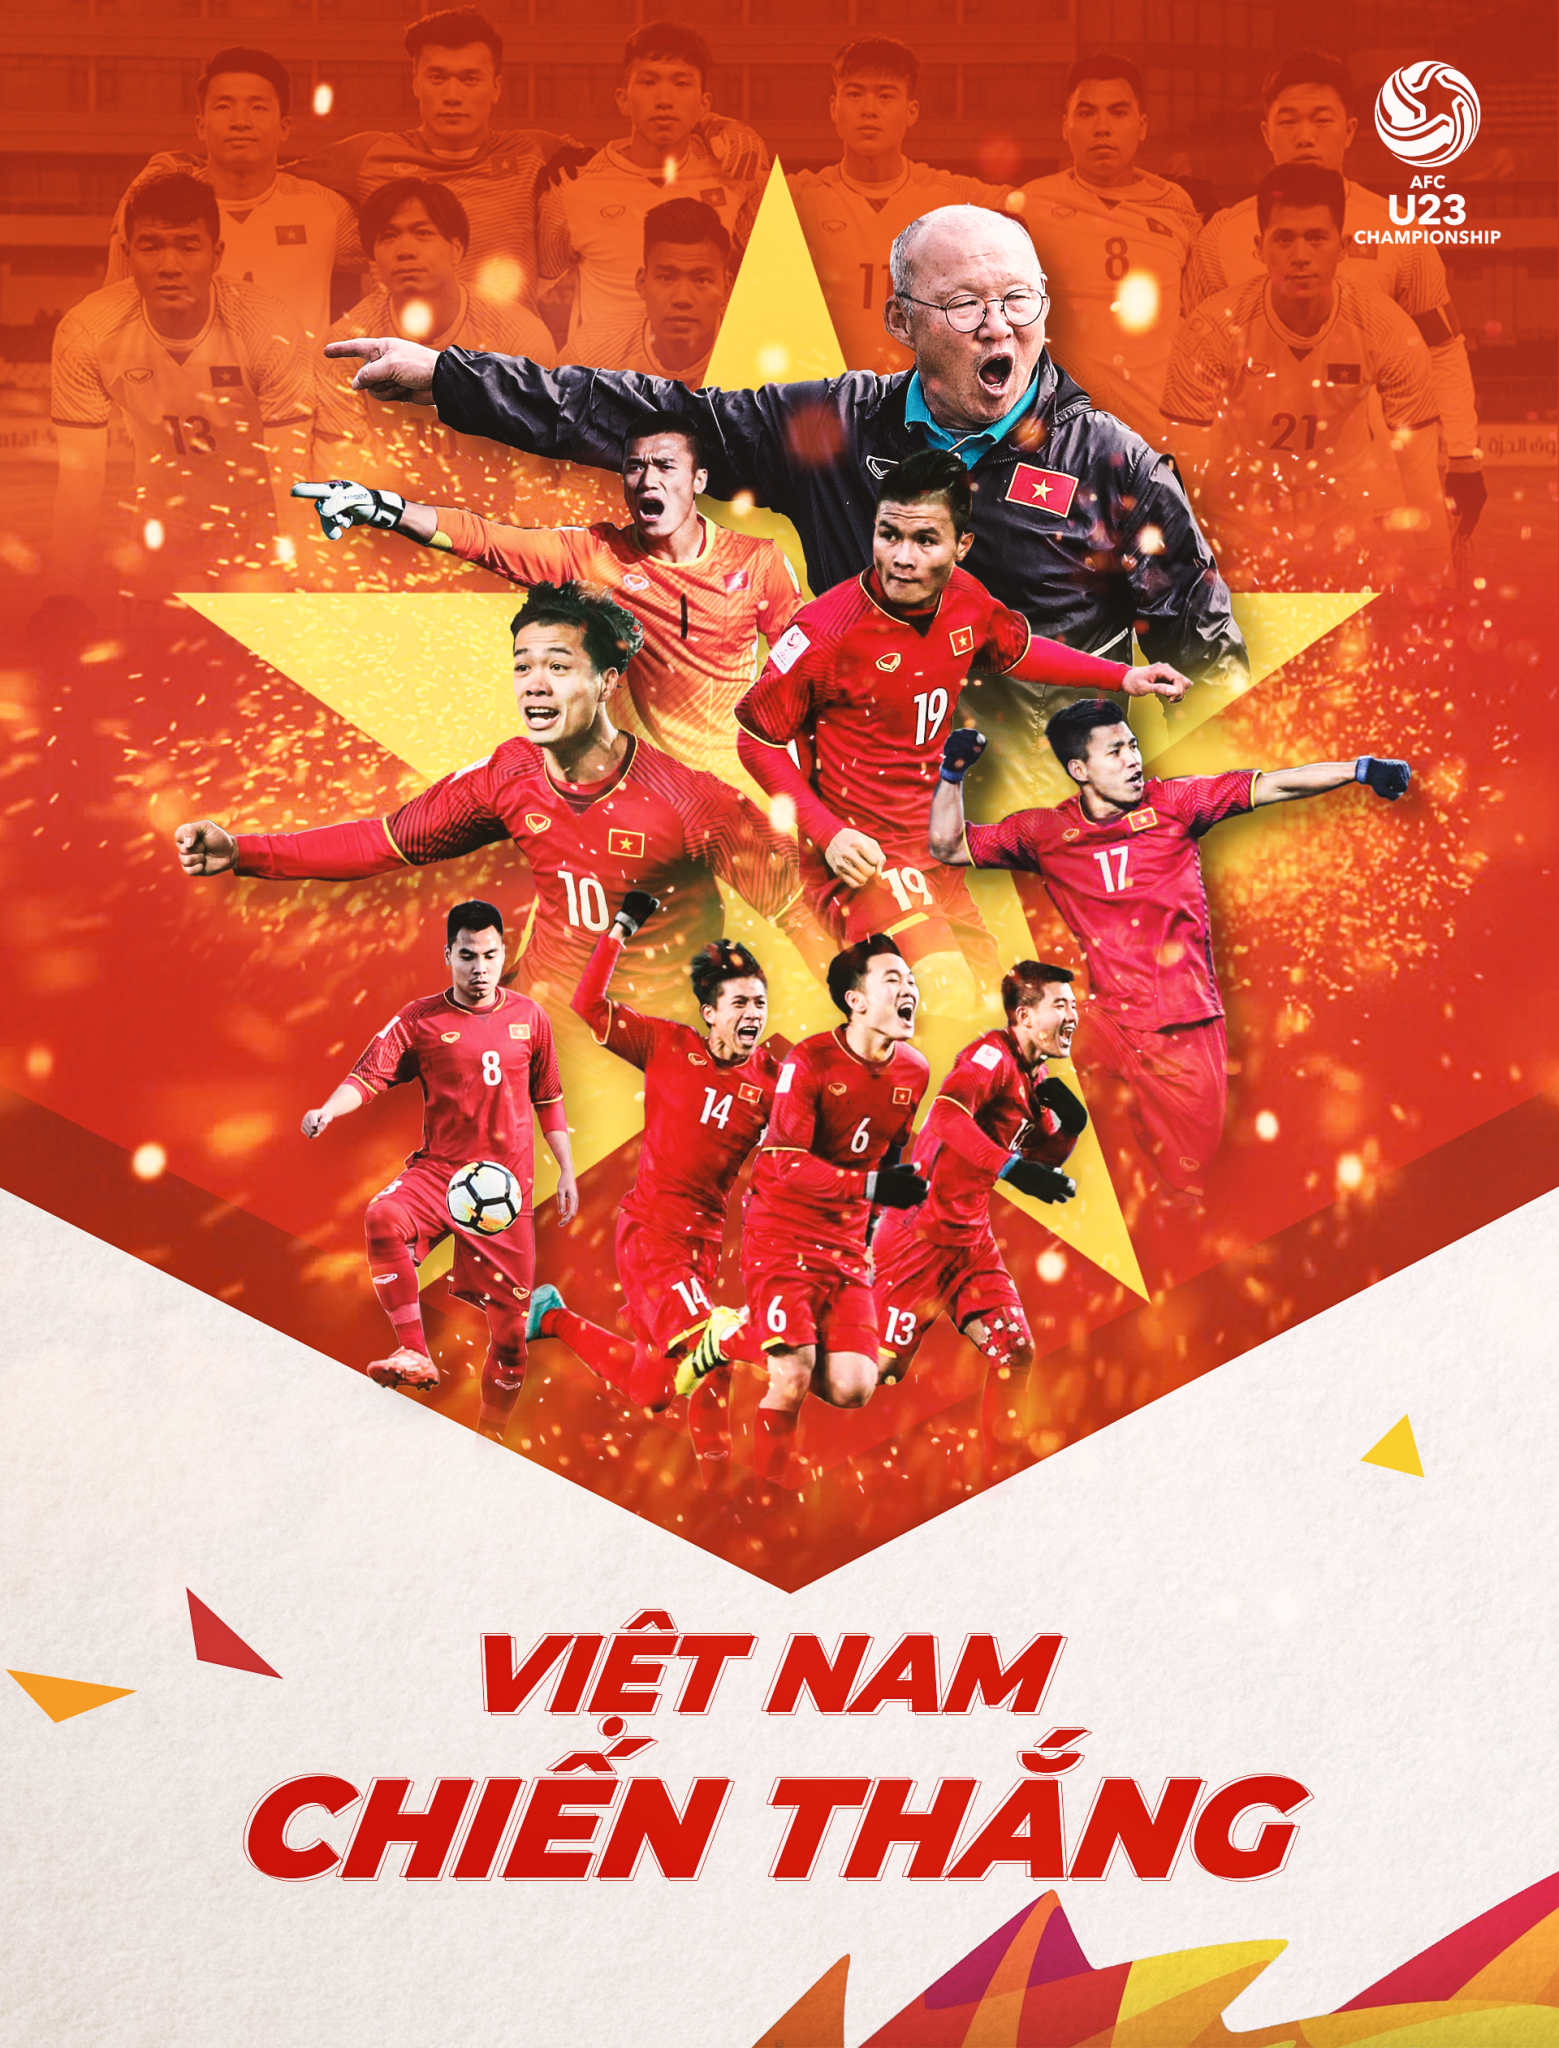 awww.ruaanhgiare.vn_wp_content_uploads_2018_01_decal_viet_nam_vo_dich.png